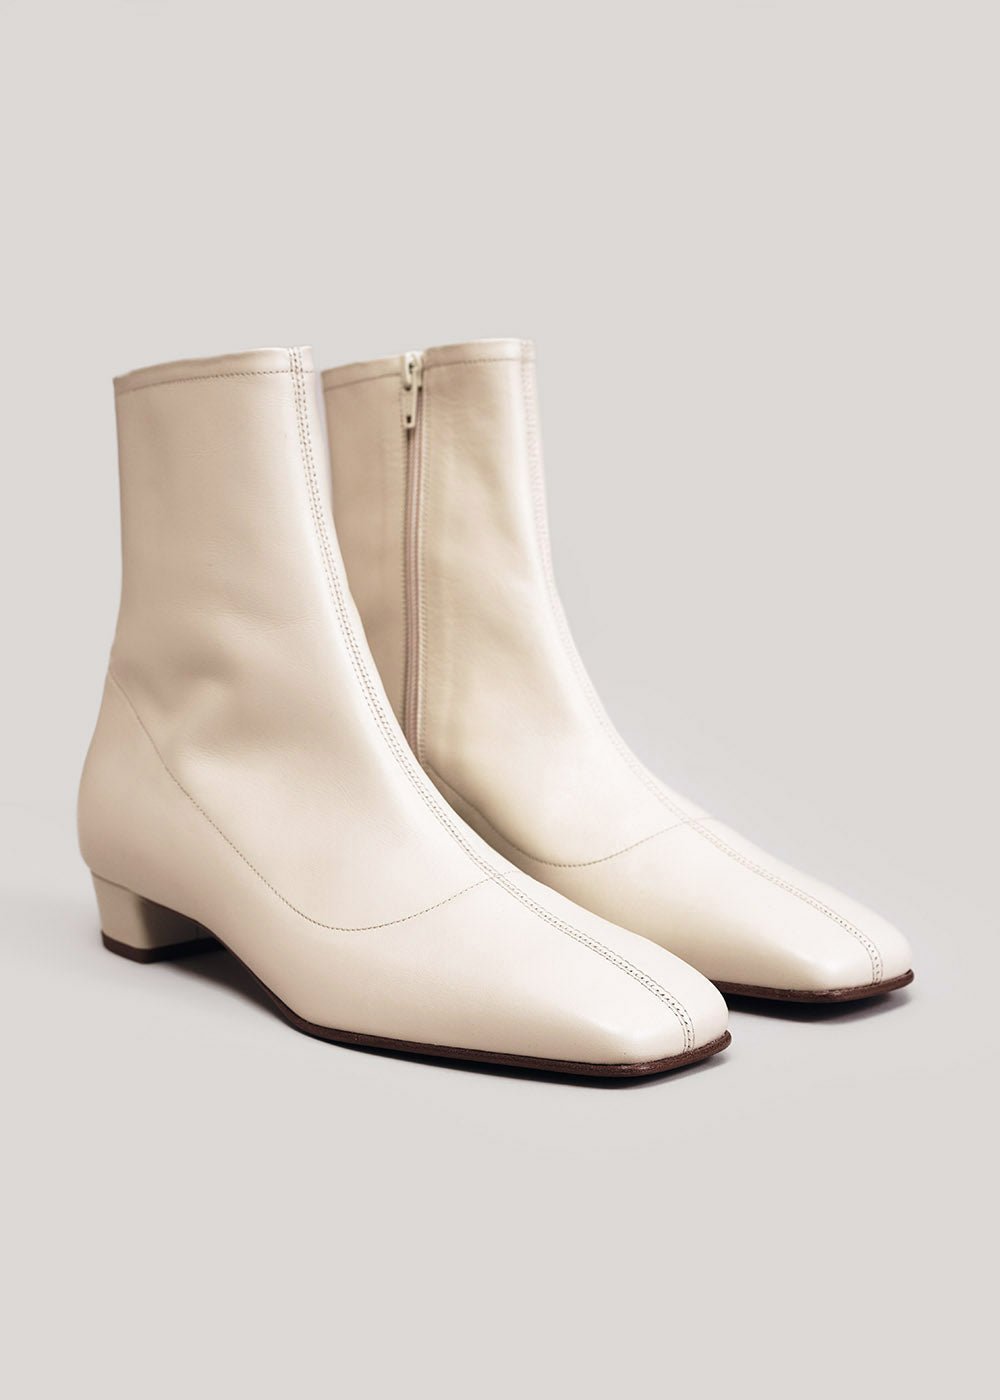 BY FAR White Leather Este Boots - New Classics Studios Sustainable Ethical Fashion Canada